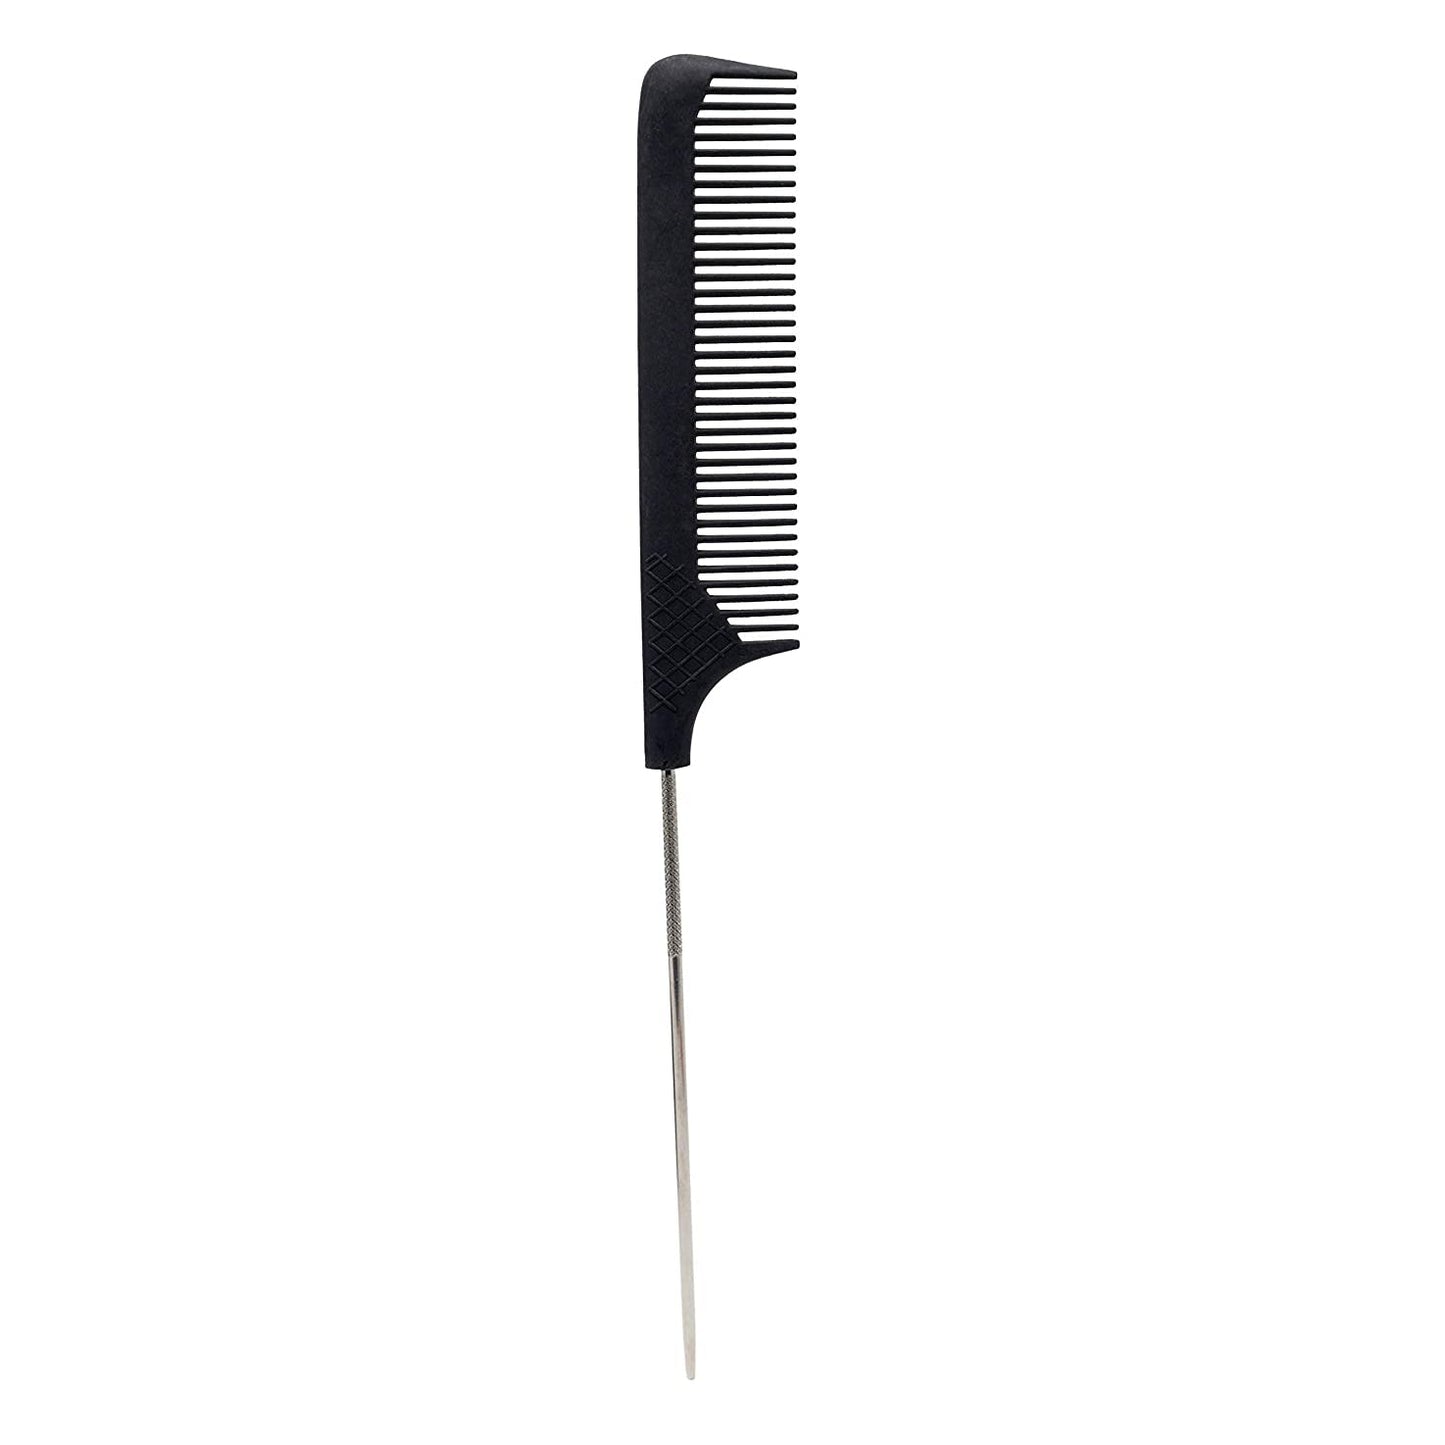 9" Pin Tail Carbon Comb | Coarse Teeth | High Heat Resistant | SC9184 | SALONCHIC - SH Salons